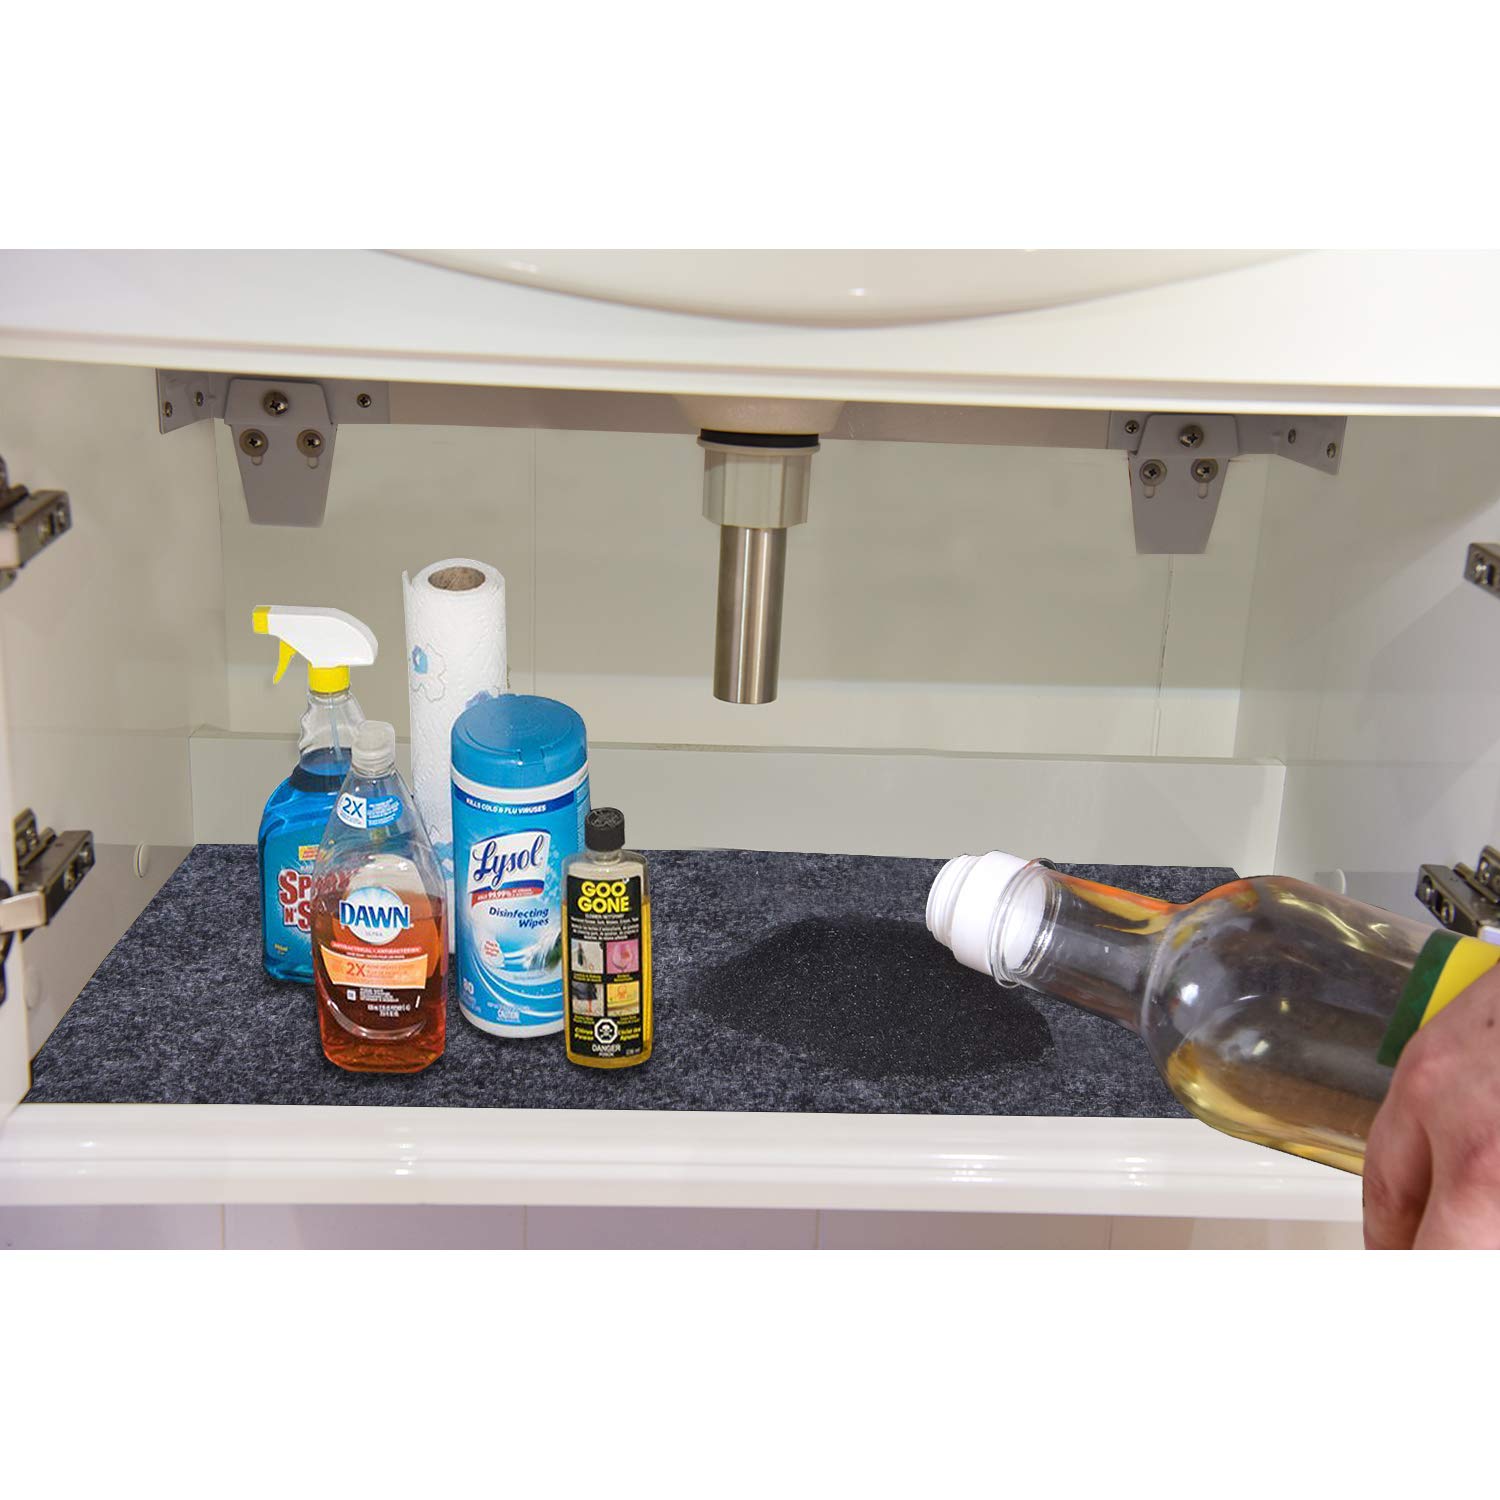 Under The Sink Mat for Cabinet,Drawer,Kitchen Tray Drip,Cabinet Liner,Absorbent Fabric Layer,Anti-Slip Waterproof Layer,Reusable,Washable (30inches x 24inches)